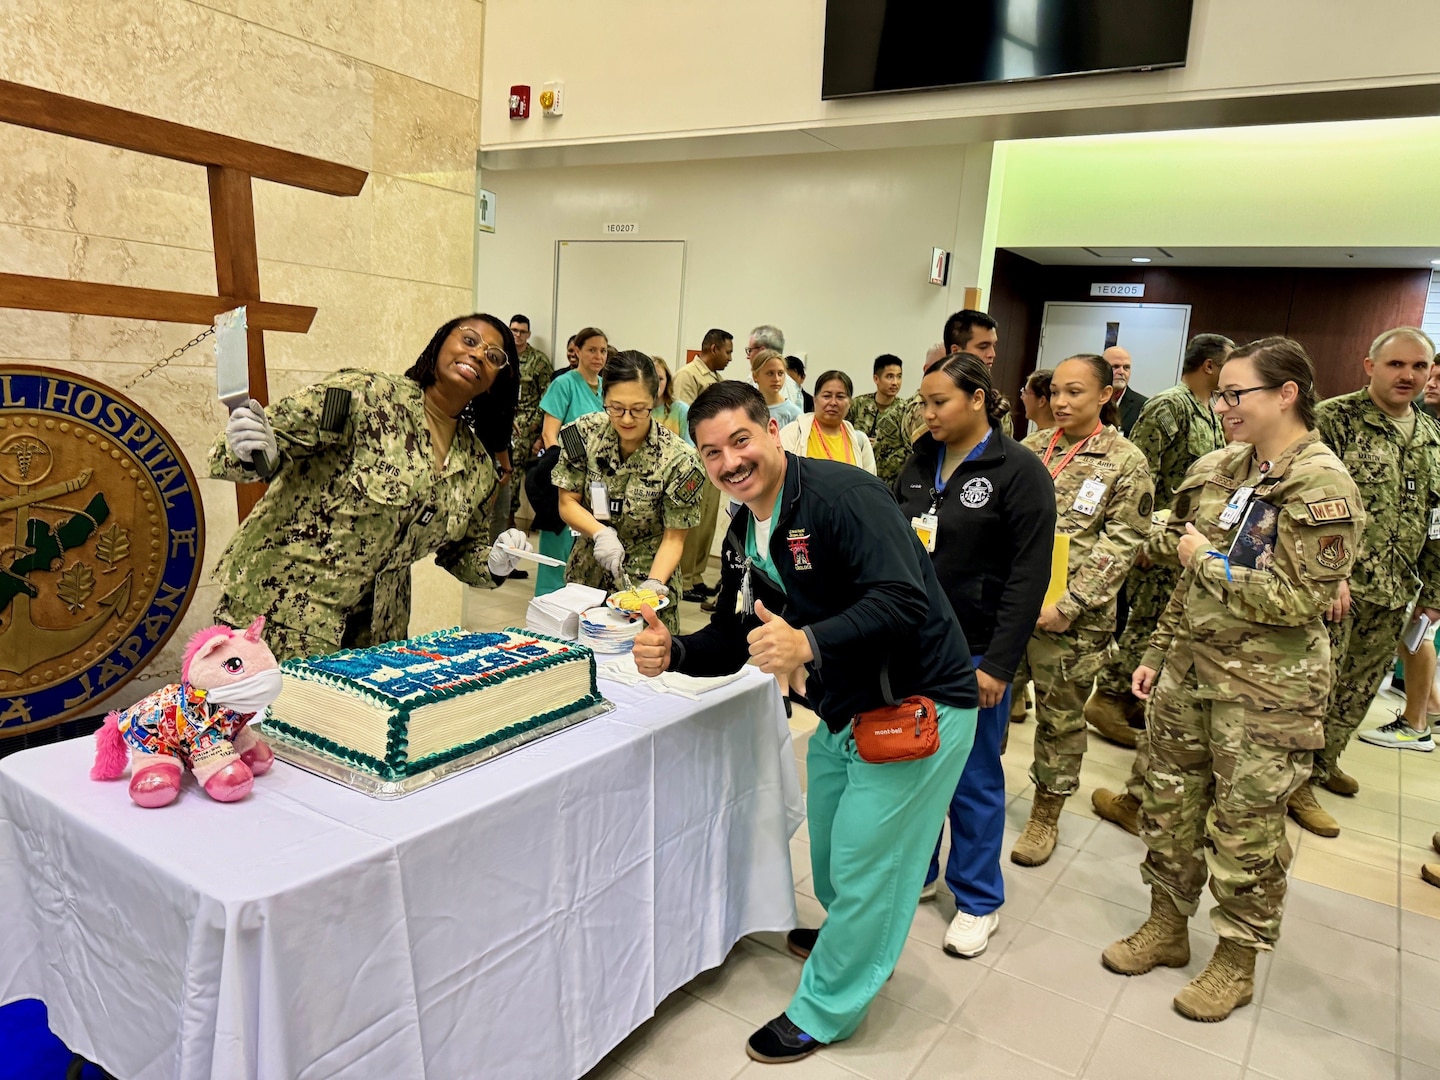 Sailors from USNMRTC Okinawa enjoys cake the morning of the MHS GENESIS launch.